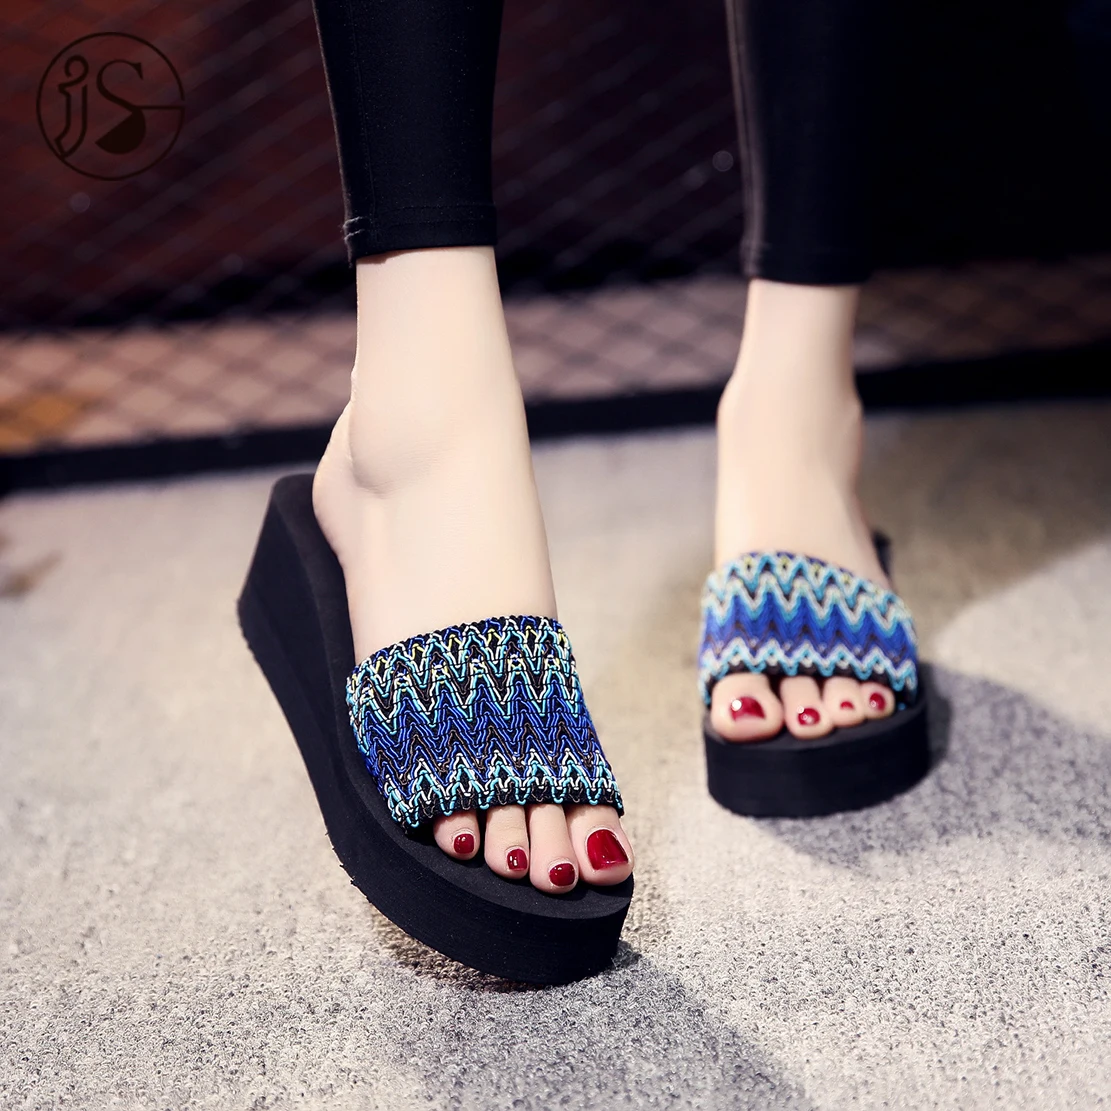 Wholesale Fashion Slippers Female Wedge Heel Platform Sandals Home Indoor  Outdoor Beach Shoes Bohemian - Buy Beach Slippers,Wedge Sandals,Summer  Slippers Product on Alibaba.com